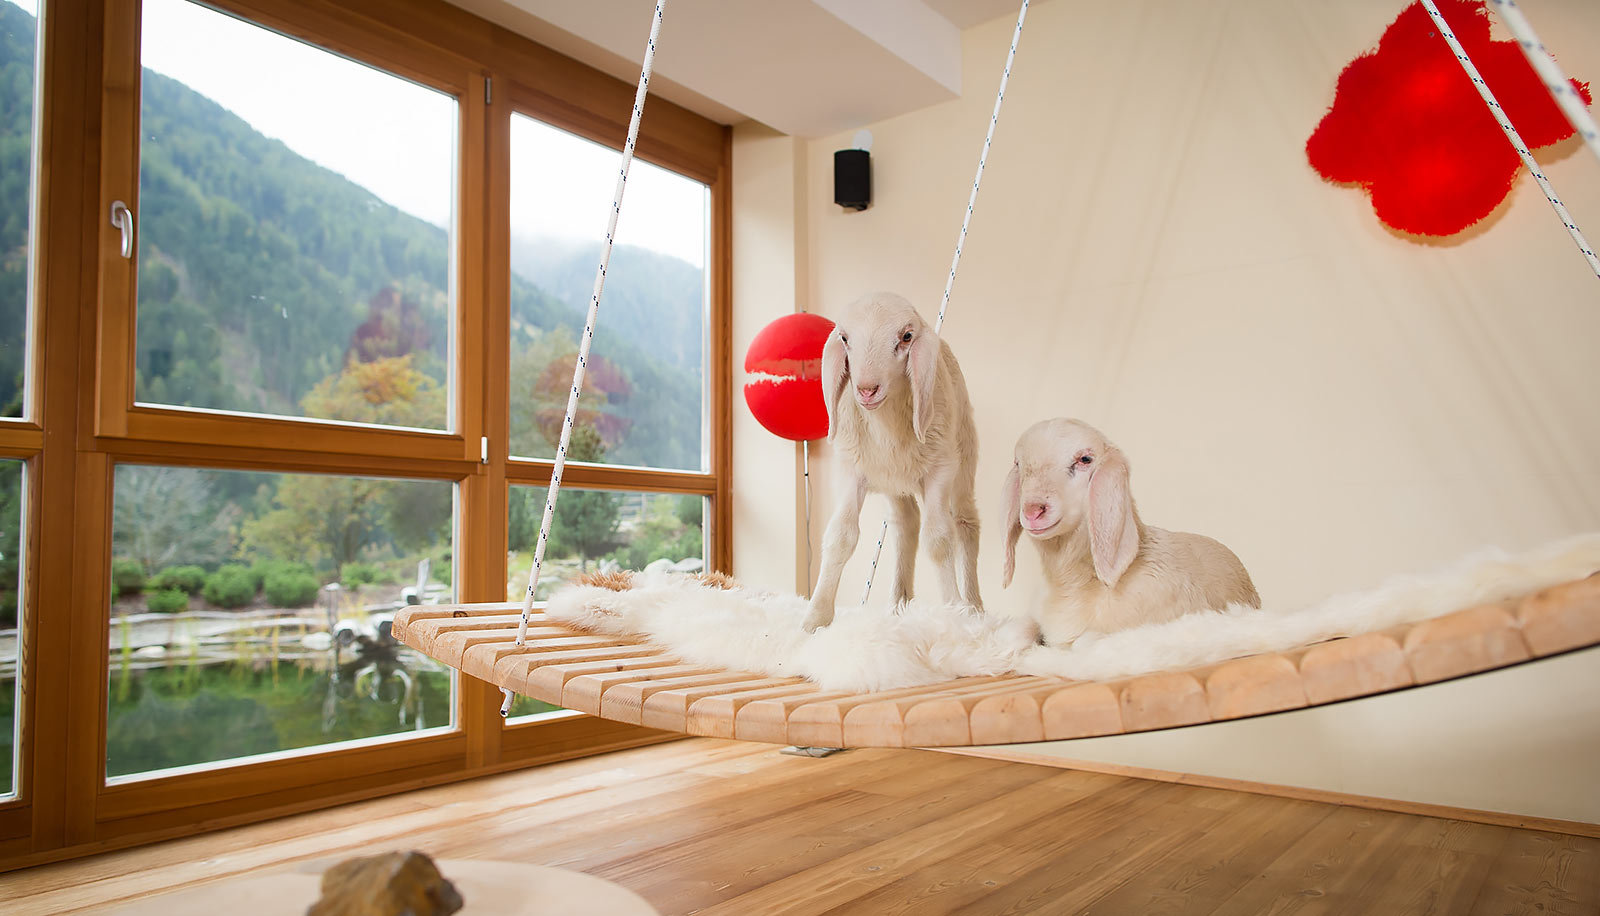 Two lambs on a swinging wooden bed with fur blanket in front of a window at Arosea Life Balance Hotel in Ultental-Val d'Ultimo